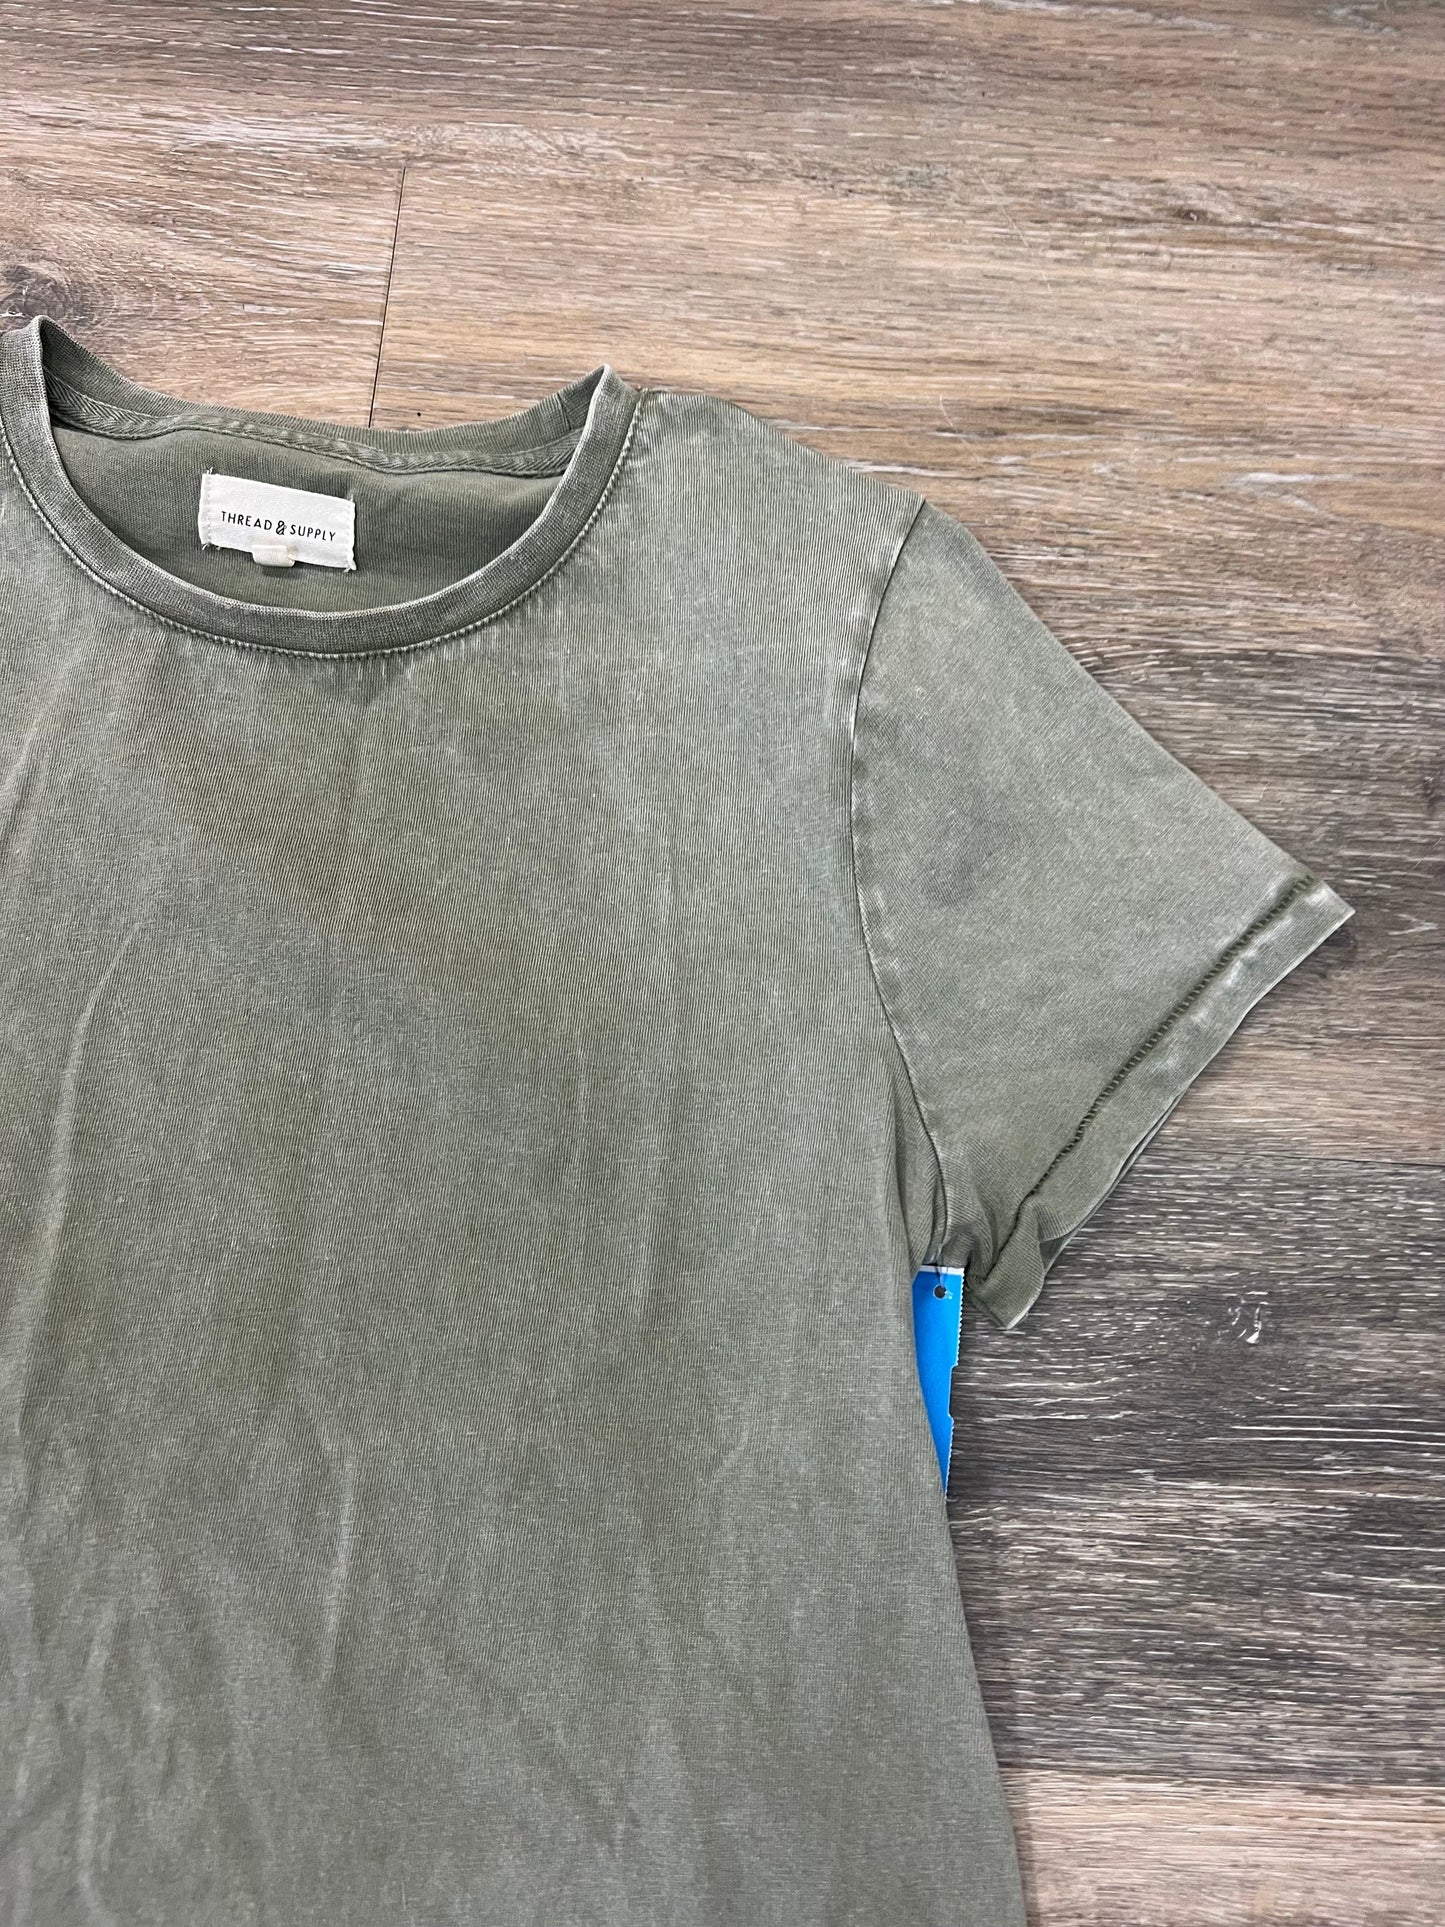 Green Top Short Sleeve Thread And Supply, Size S